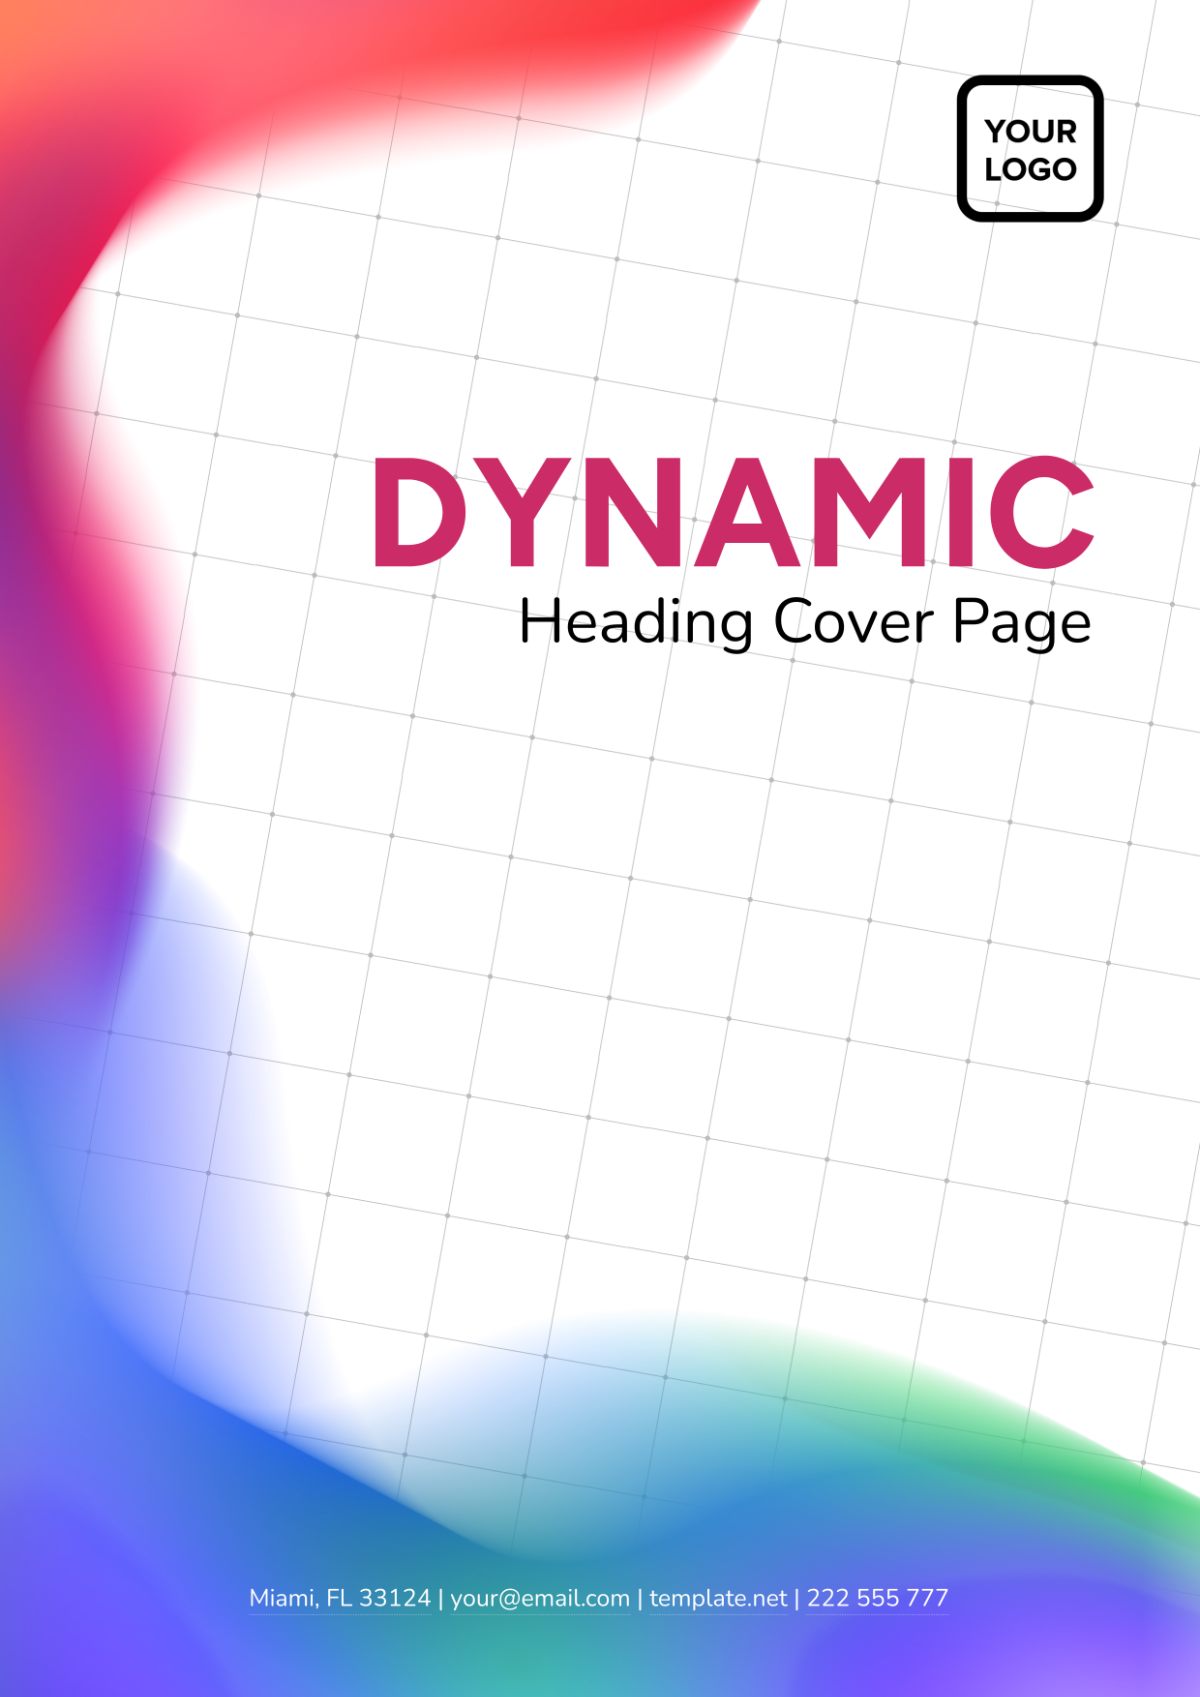 Dynamic Heading Cover Page Template